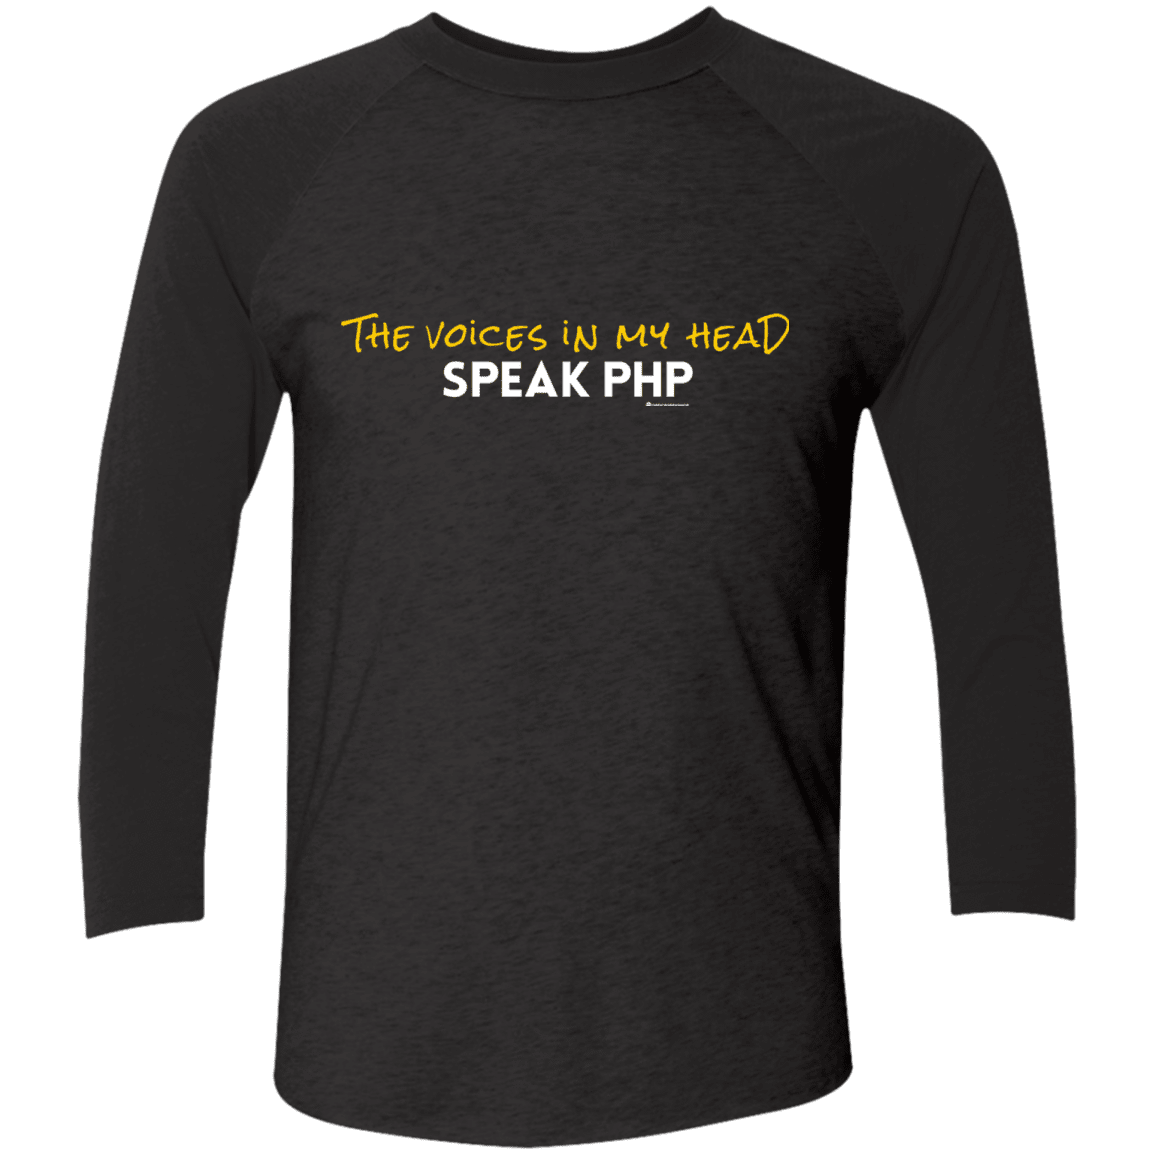 T-Shirts Vintage Black/Vintage Black / X-Small The Voices In My Head Speak PHP Men's Triblend 3/4 Sleeve